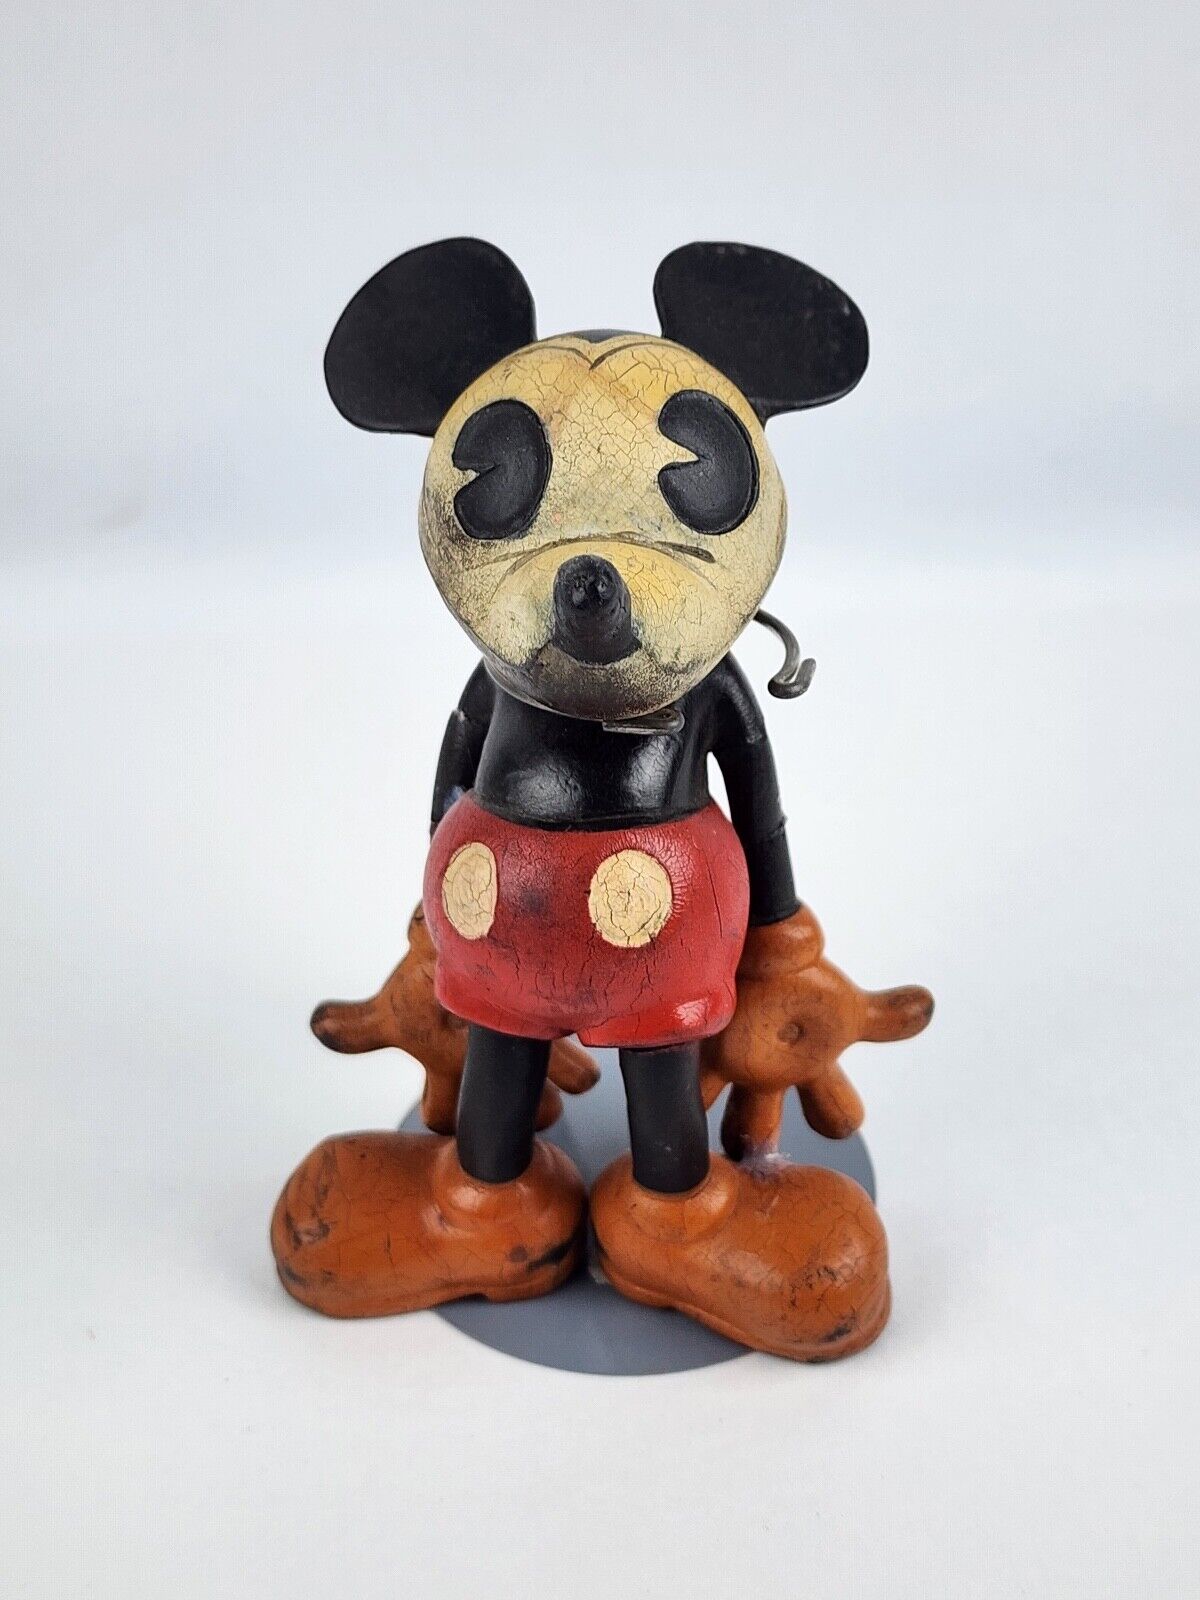 1930\'s Sieberling Rubber Mickey Mouse Pie-eyed Figure Toy Disney -has repairs